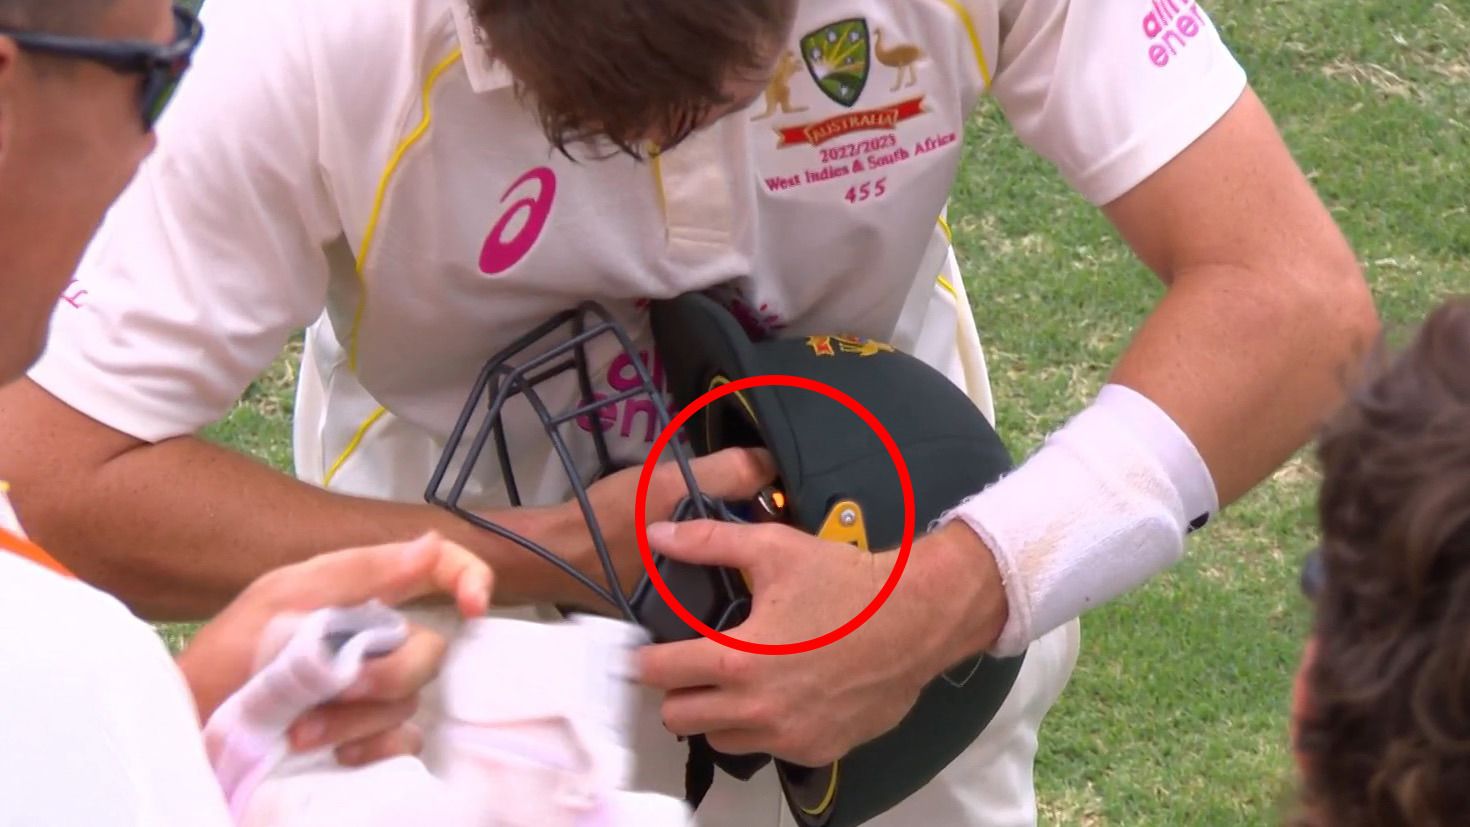 Marnus Labuschagne burned something on the inside of his helmet during the drinks break of the first morning of the third test against South Africa.